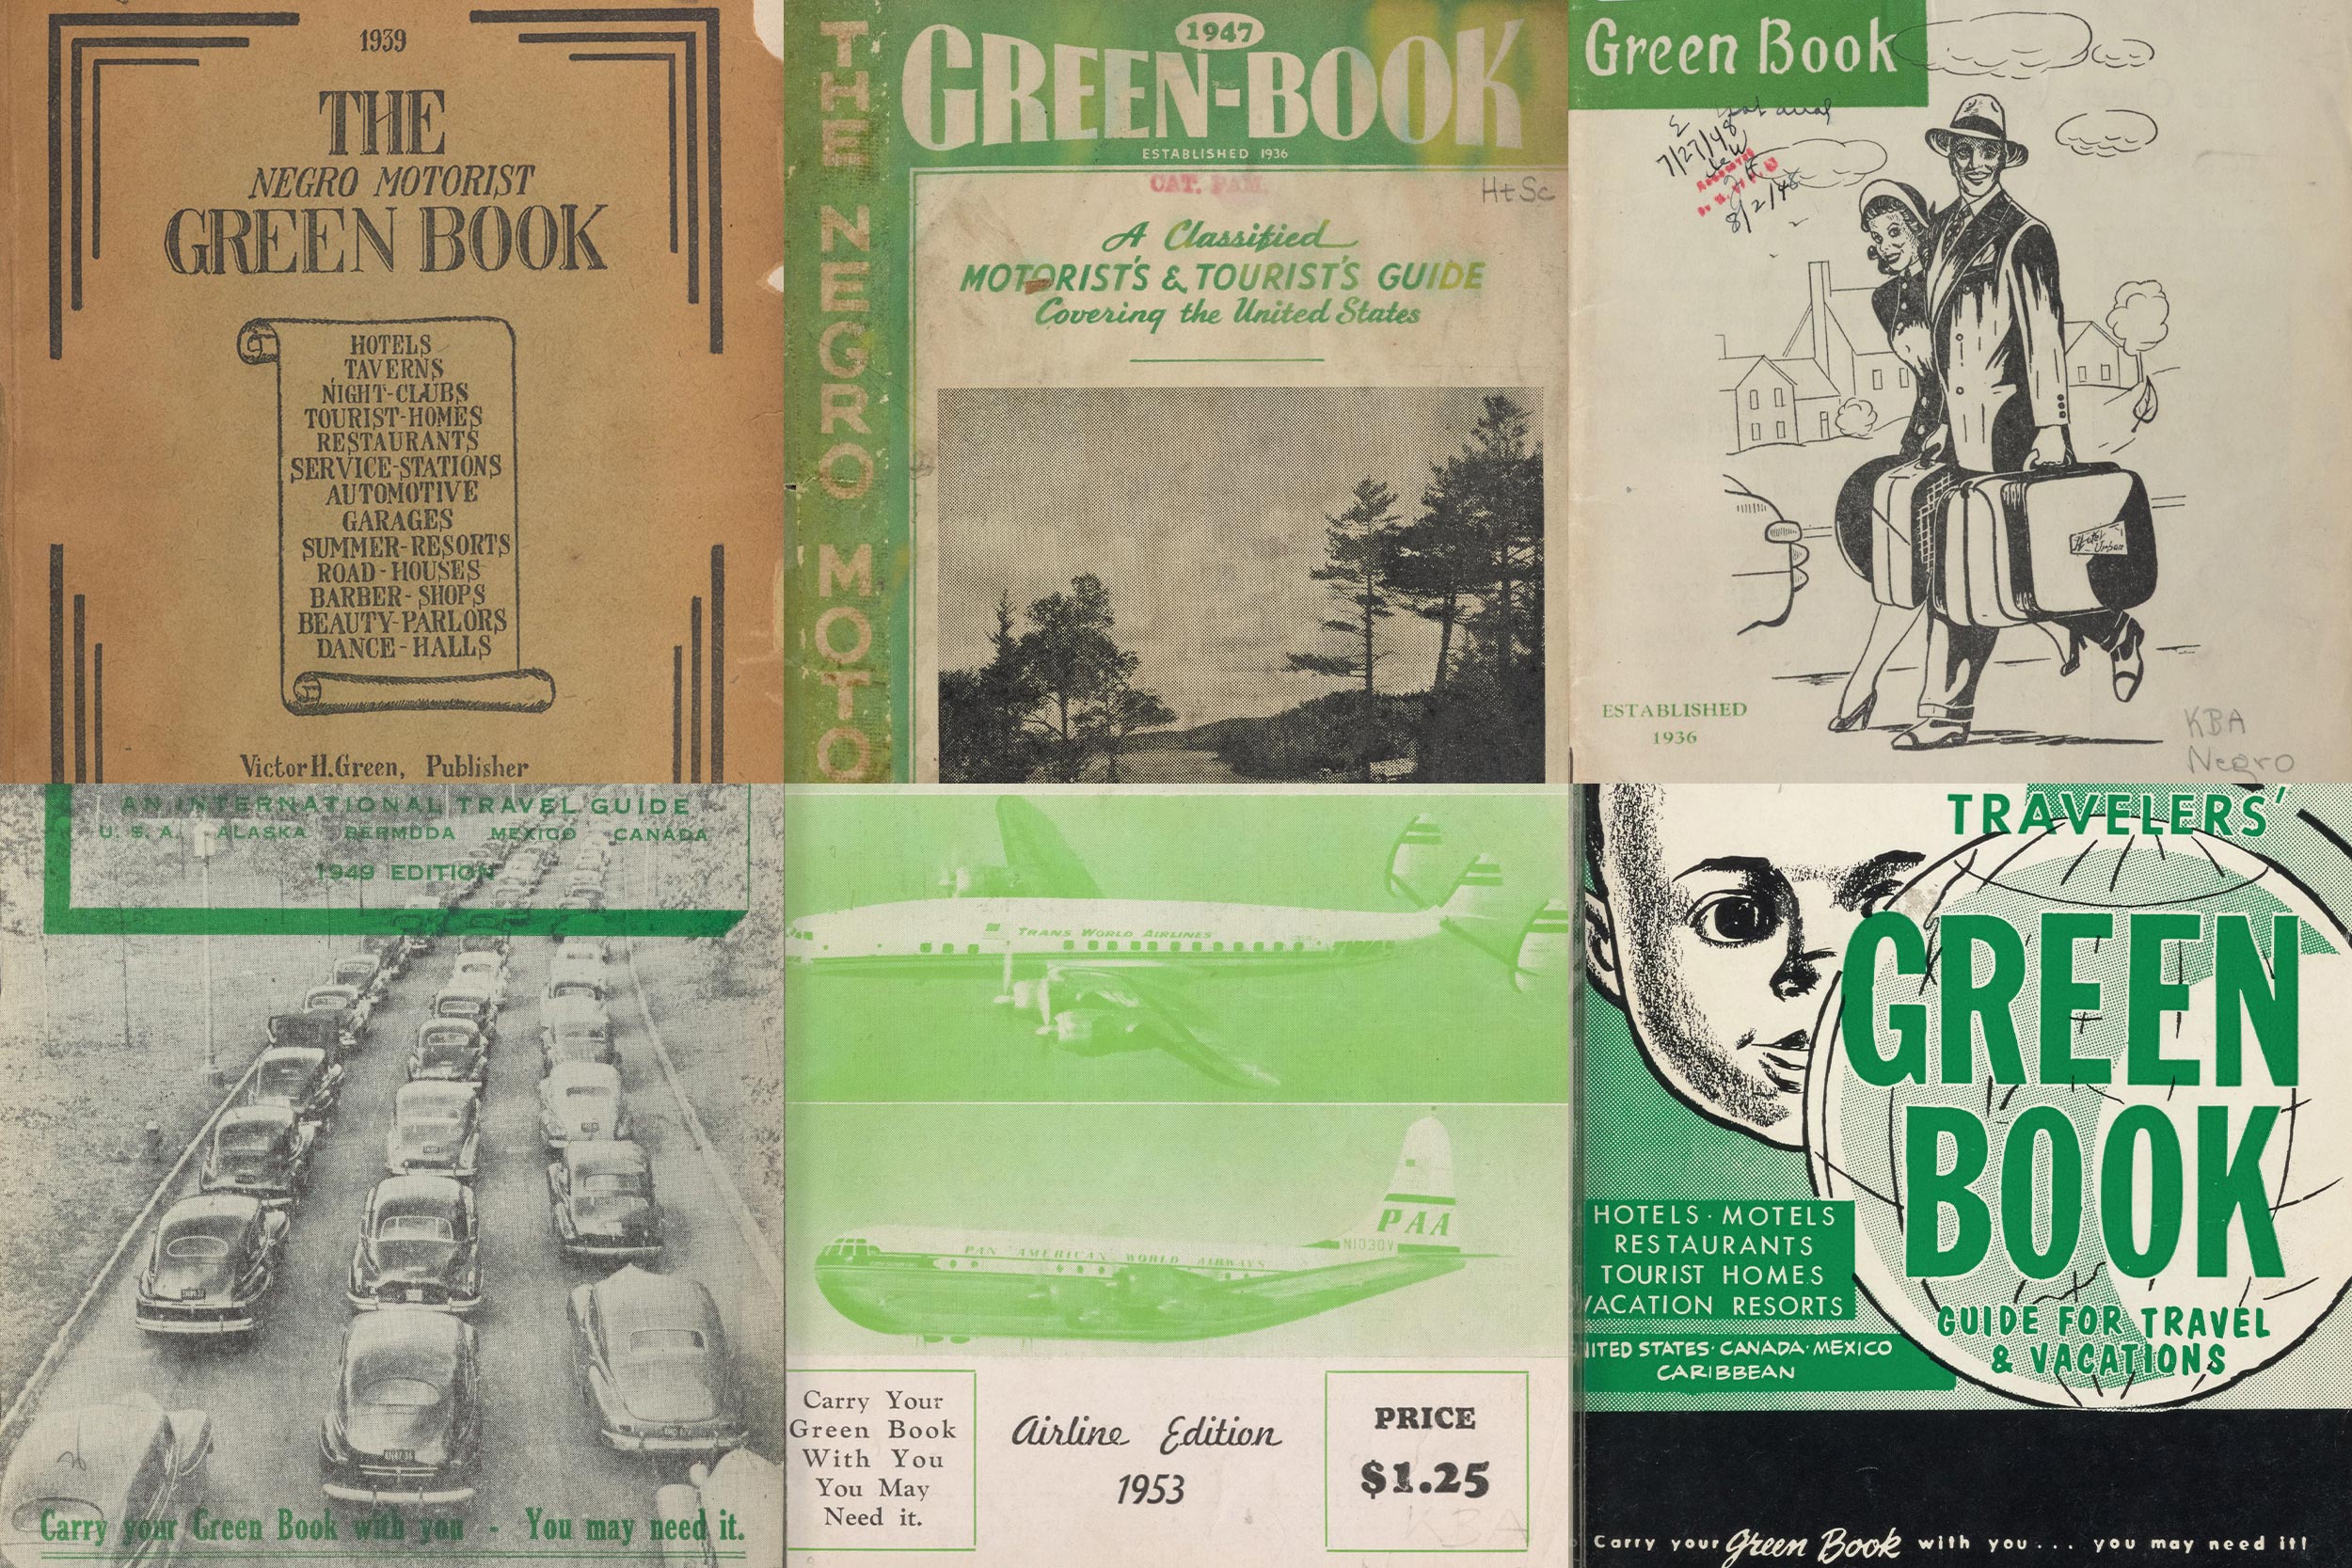 six images of vintage The Negro Motorist Green Book